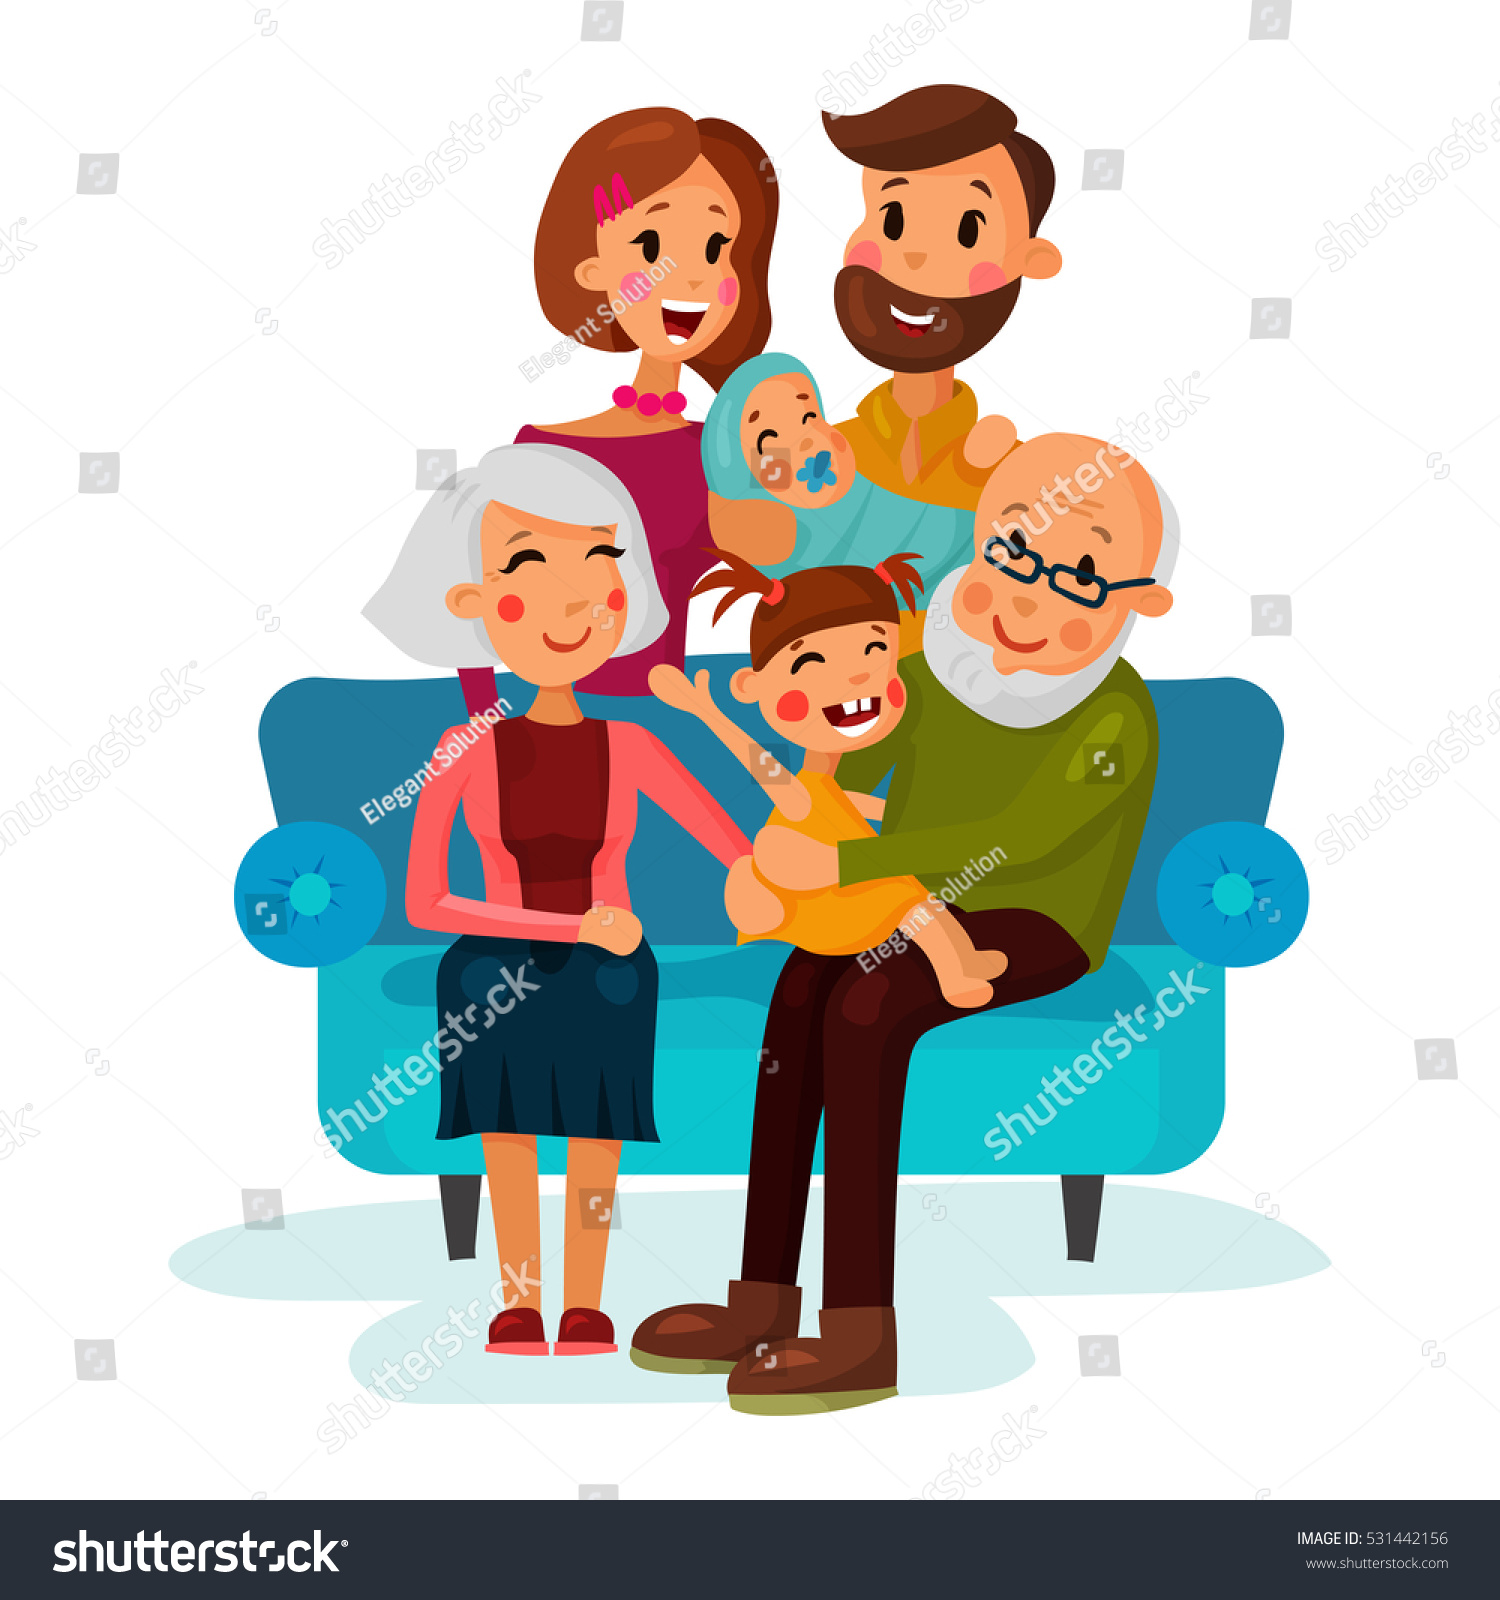 Family Children Sitting On Couch Father Stock Vector 531442156 ...